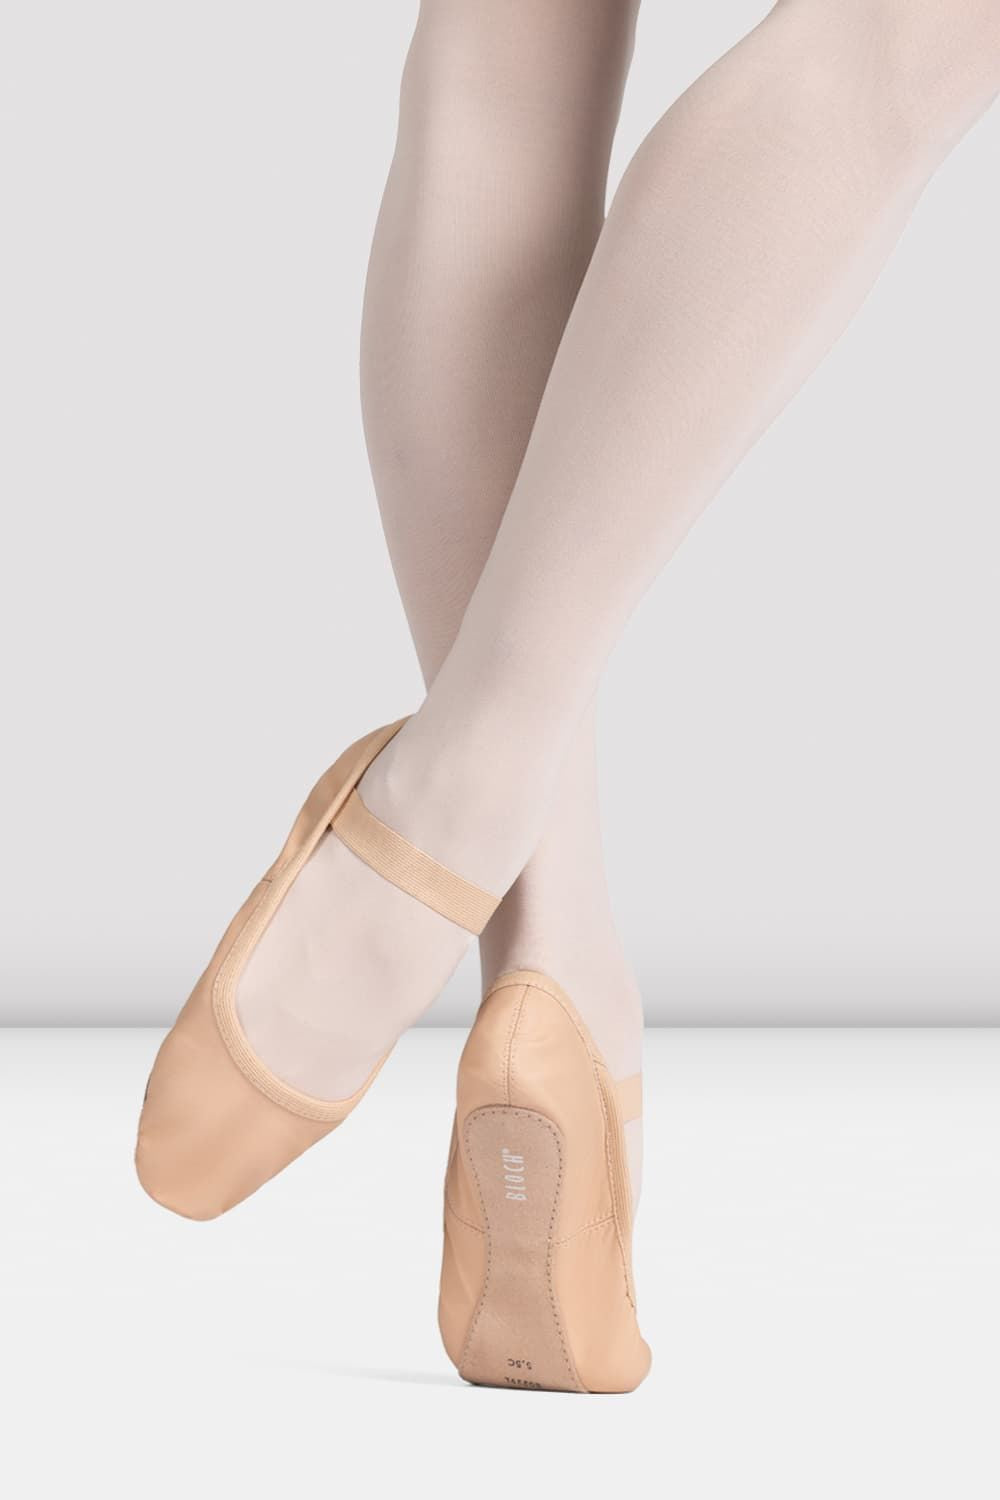 BLOCH Childrens Arise II Leather Ballet Shoes, Pink Leather